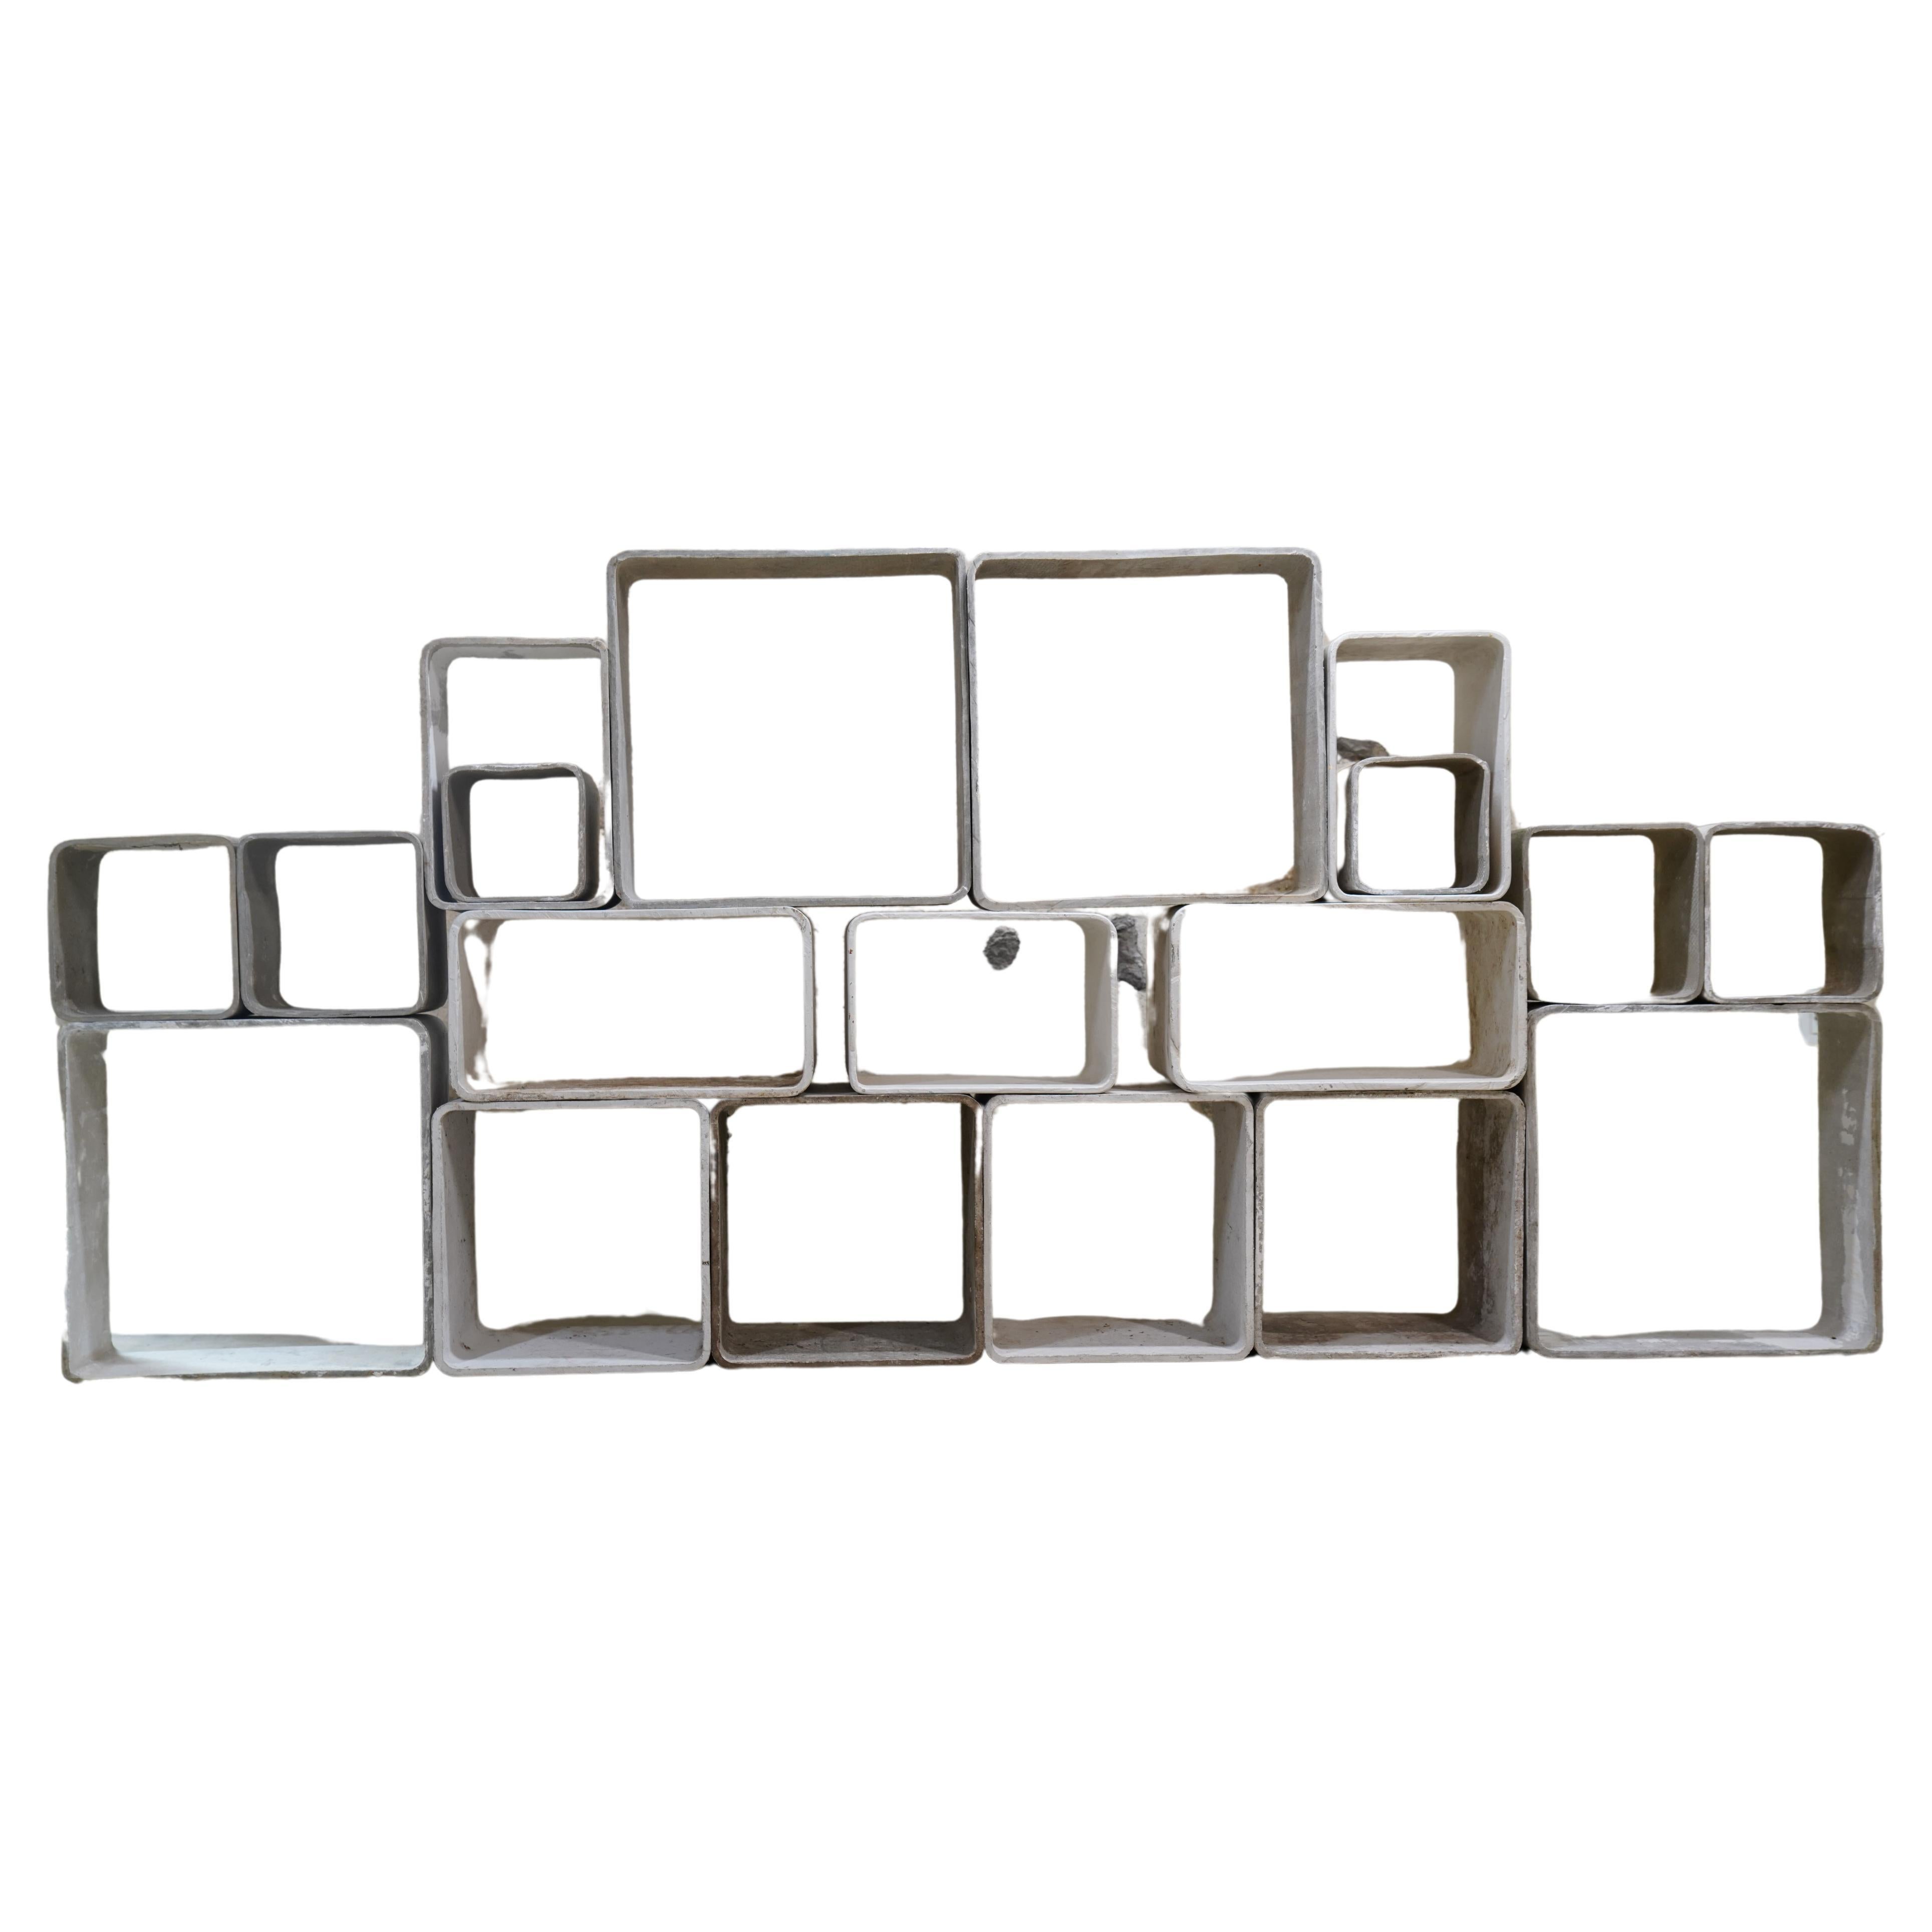 Incredible concrete modular bookcase by Swiss architect and Industrial design pioneer Willy Guhl for Eternit, Switzerland, 1970's. 19 individual concrete cubes can be arranged in variety of shapes to suit whatever space.

Varying degrees of patina,